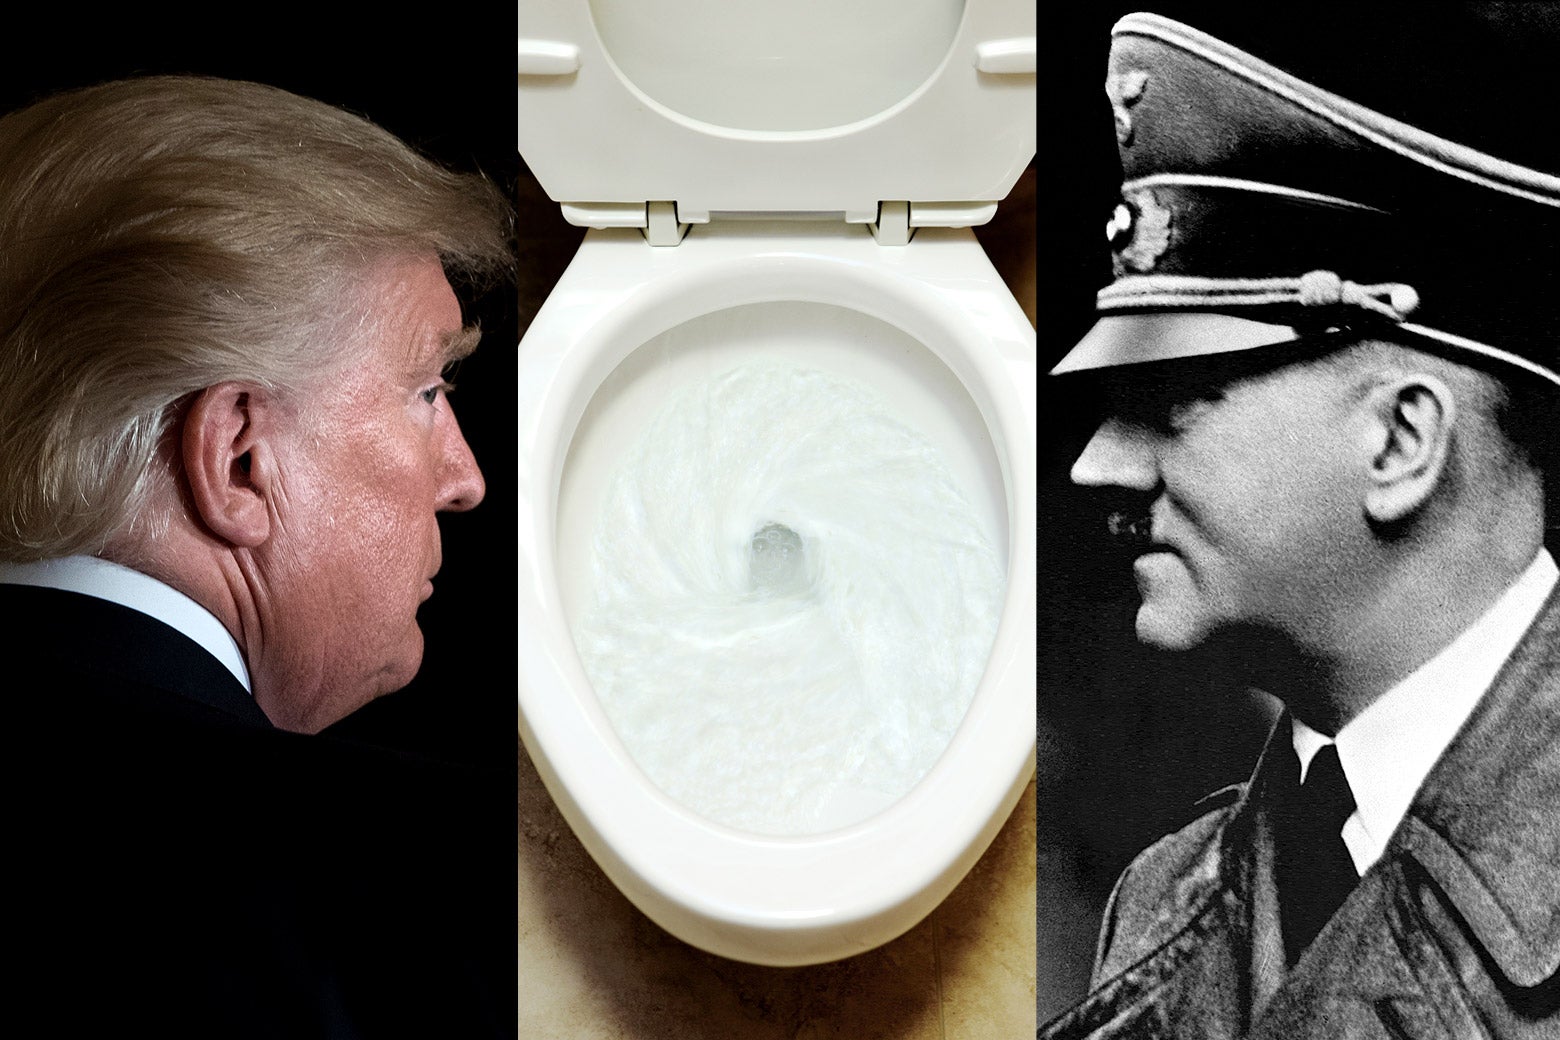 Dramatic head shot images of Trump and Hitler are positioned so that they are both staring at a gleaming, white, flushing toilet at the center of the image.